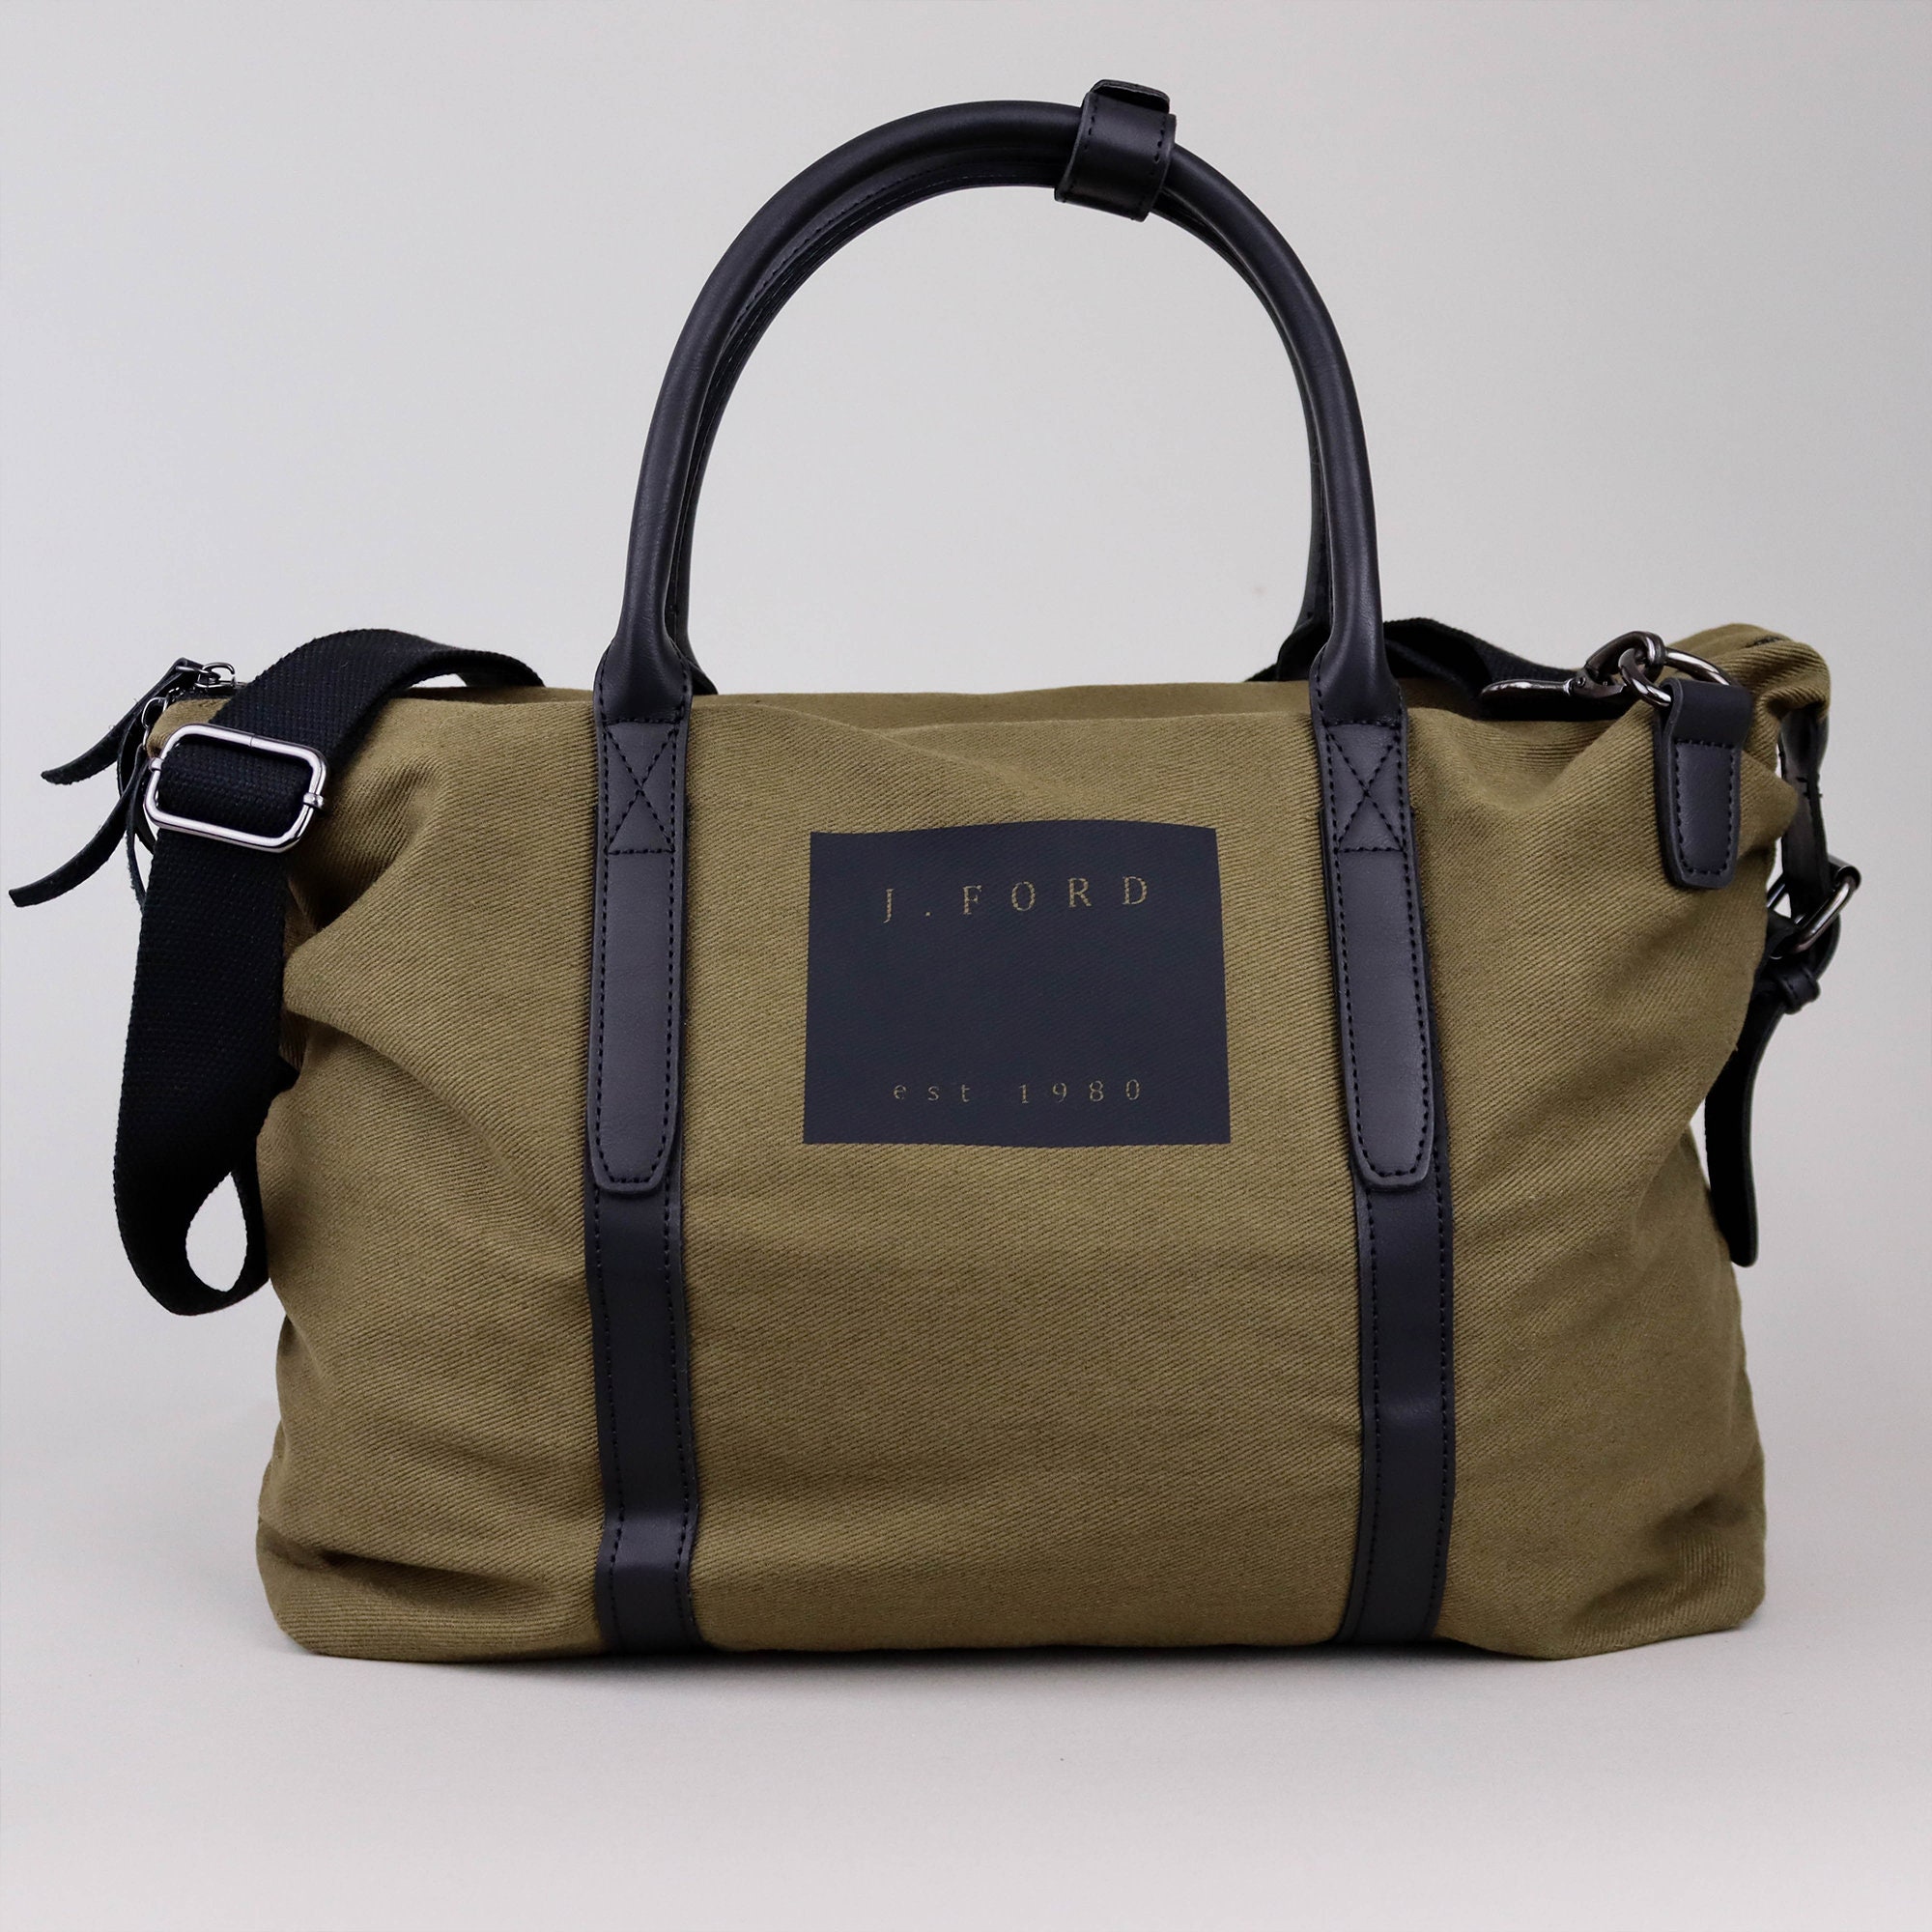 Personalised Urban Utility Fashion Bag Great Gift Idea for Him 